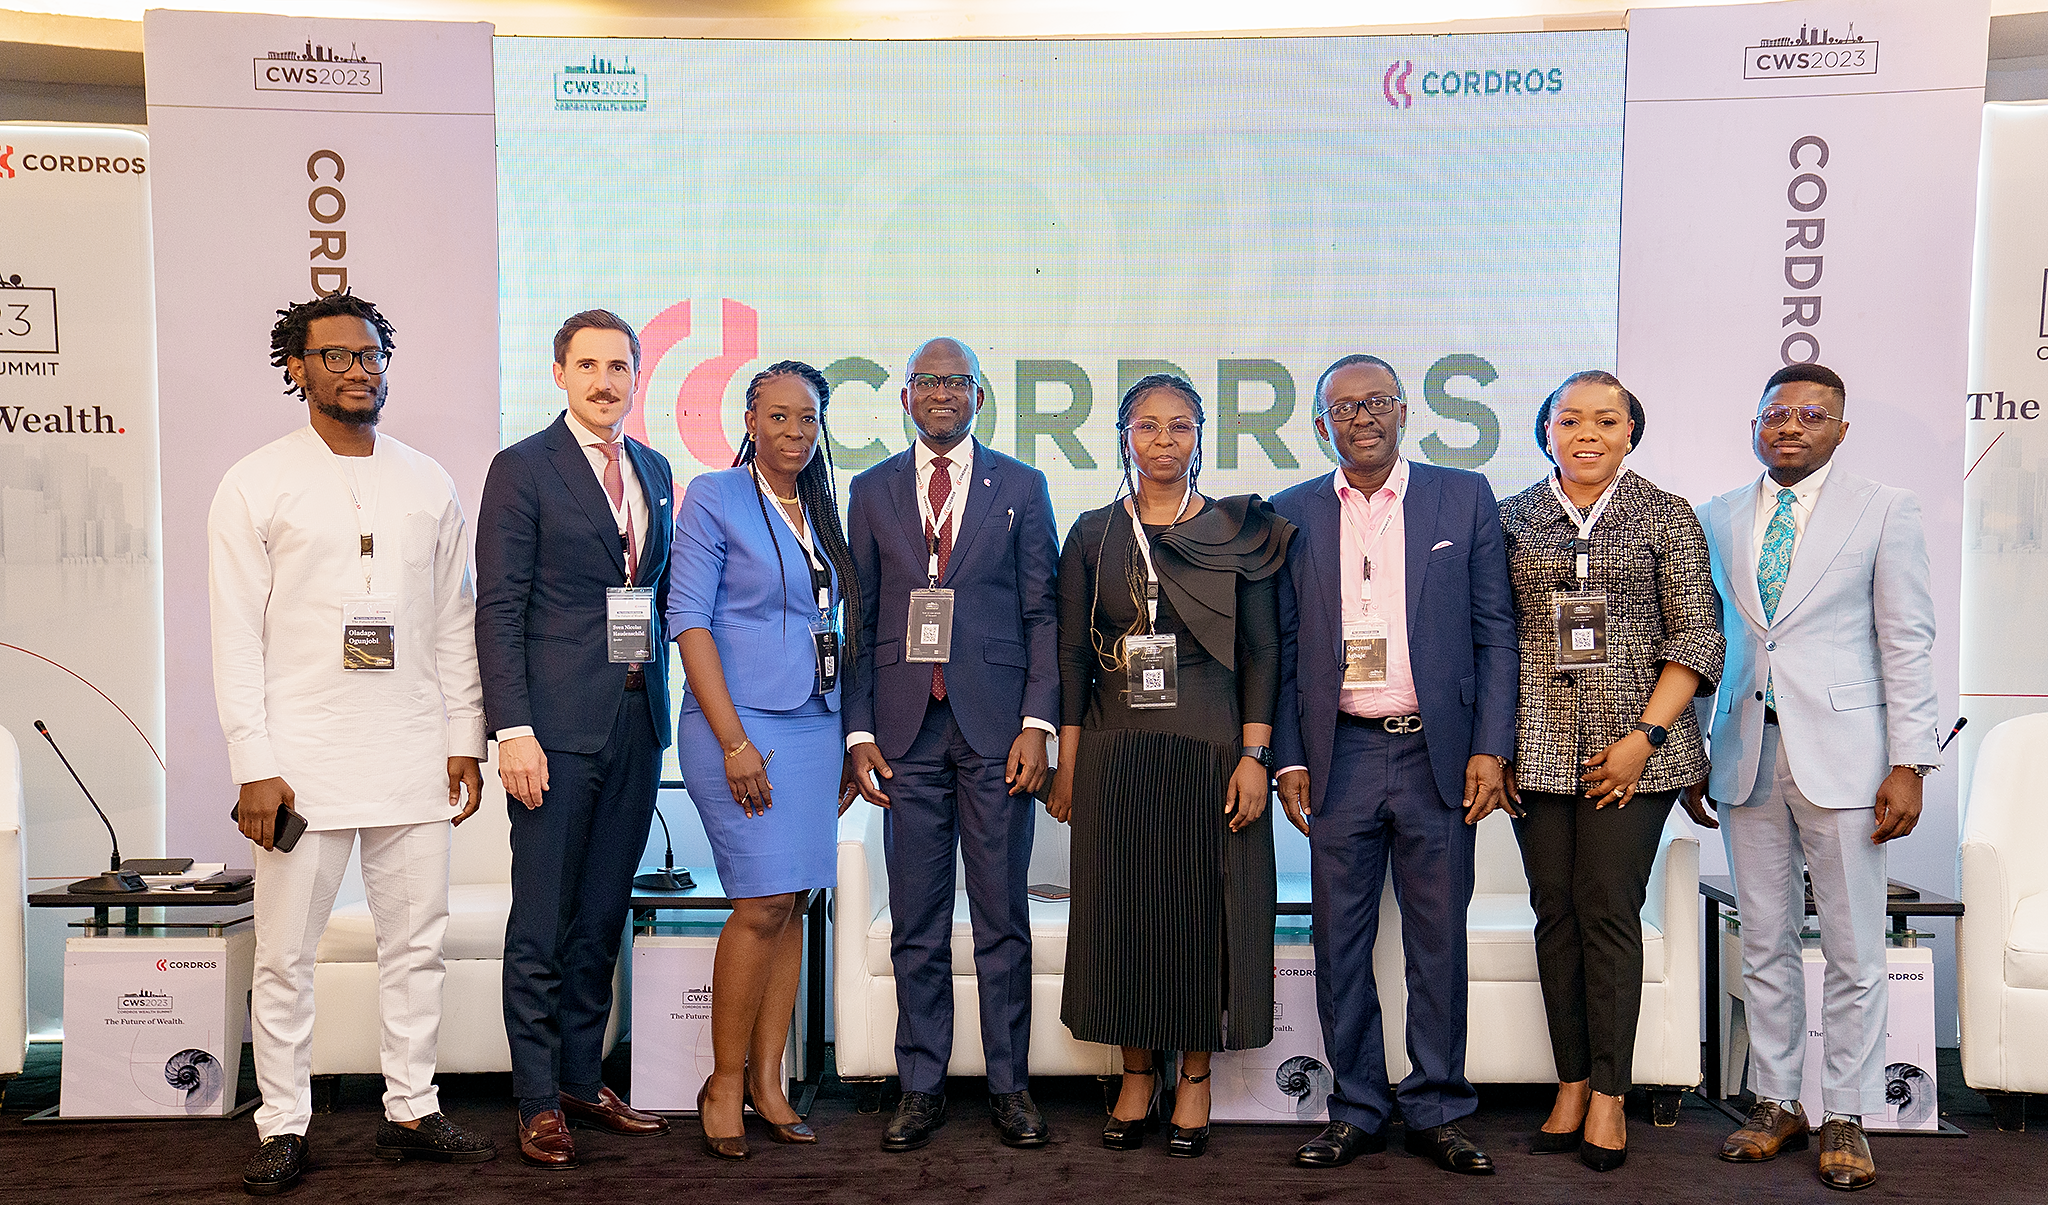 The Cordros Wealth Summit 2023 – The Future of Wealth